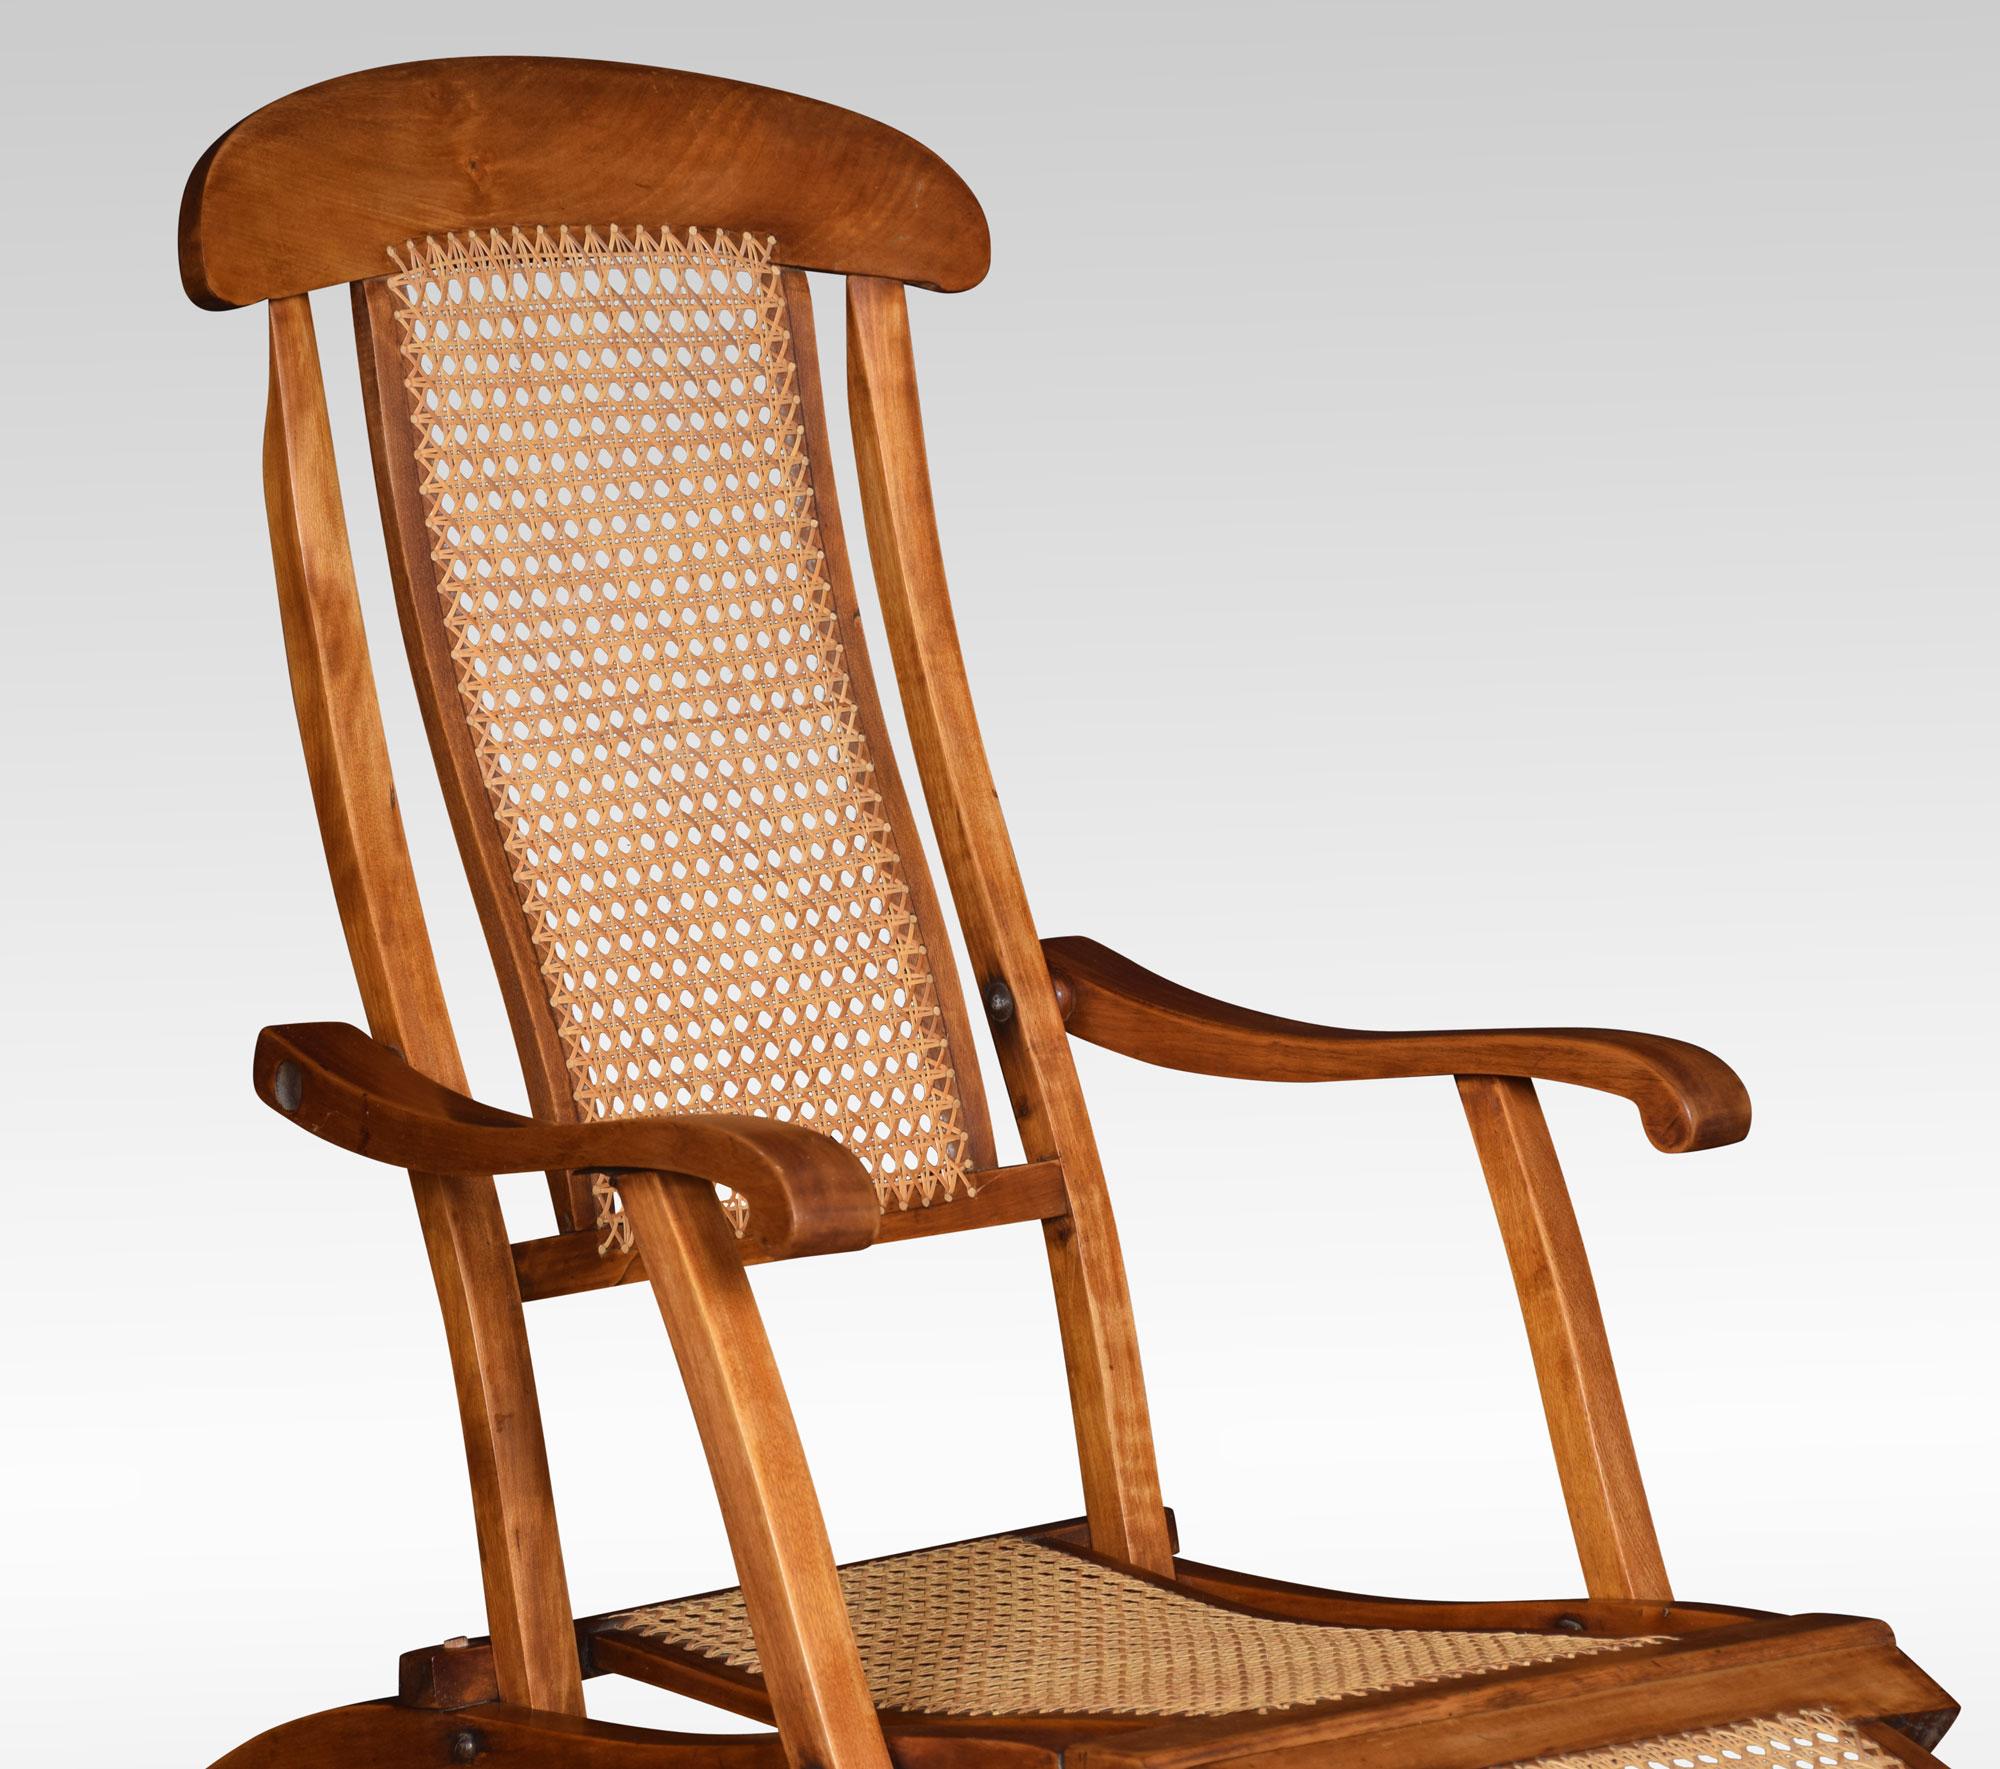 Walnut framed folding steamer deck chair. The cane work back and seat, flanked by scrolling arms and splayed legs. It folds very easily for storage.
Dimensions:
Height 38.5 inches
Width 50 inches
Depth 23 inches.